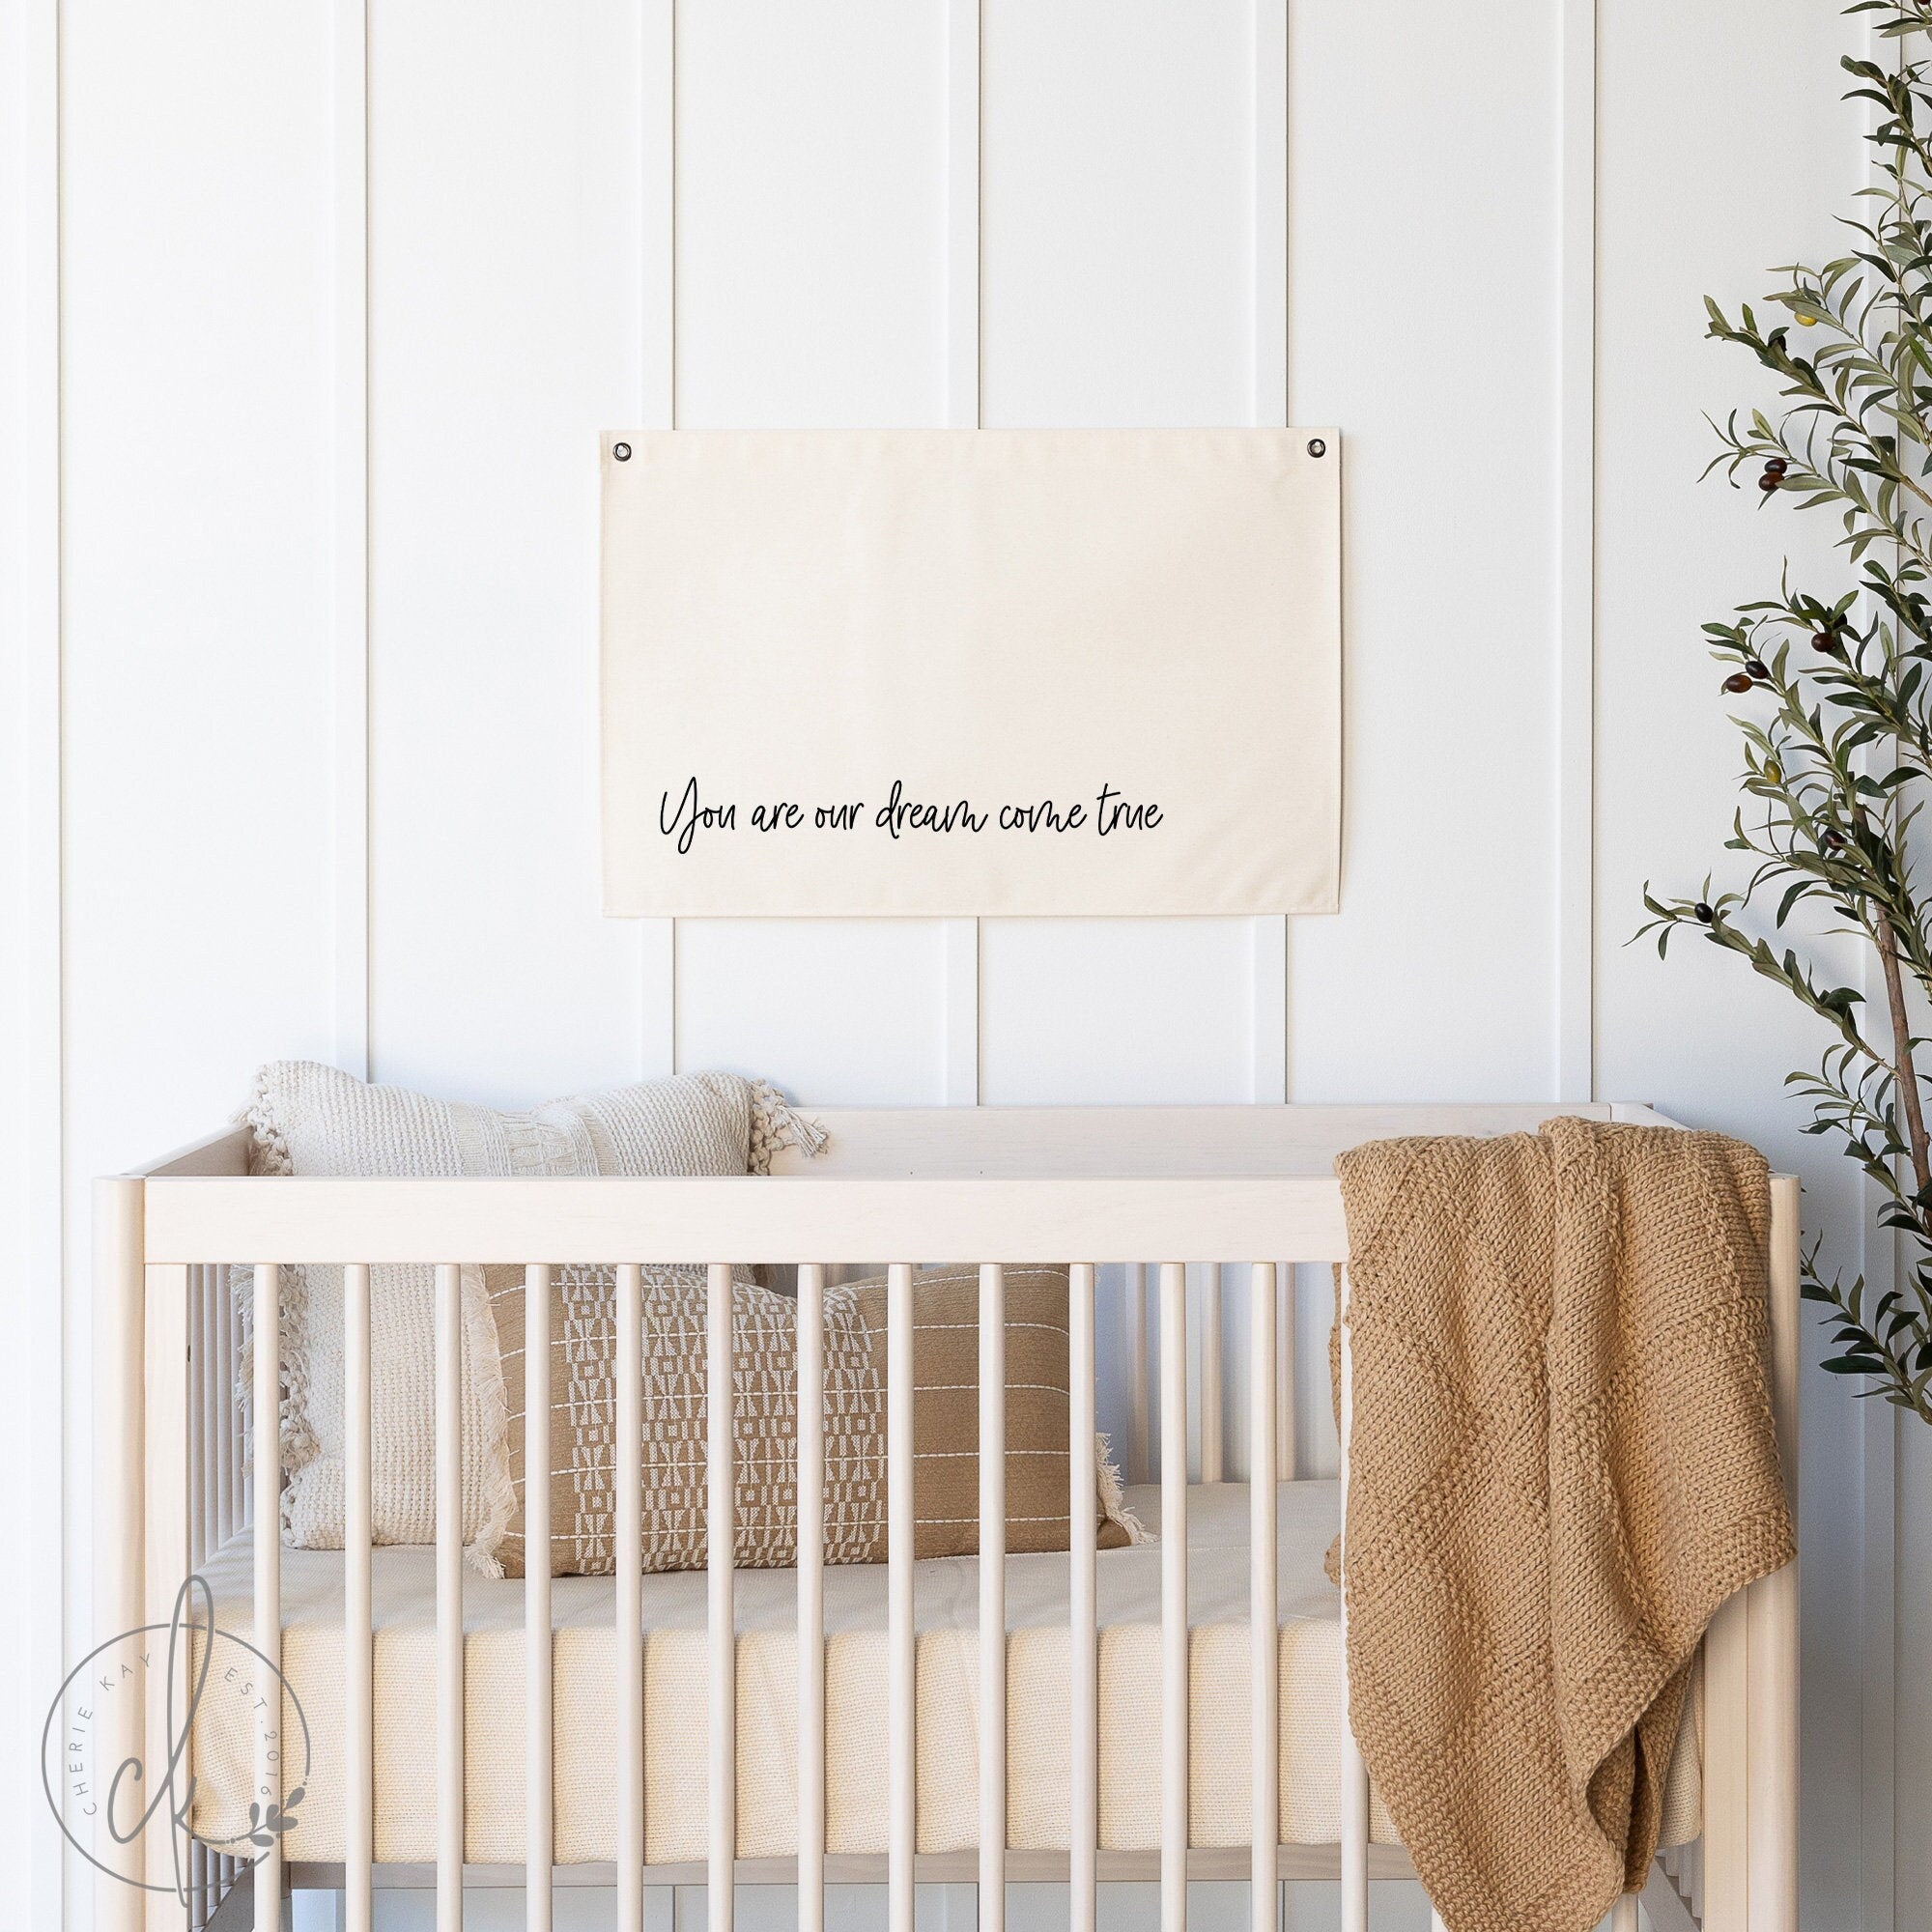 You are our dream come true quote on a canvas flag | Hanging in a trendy neutral nursery